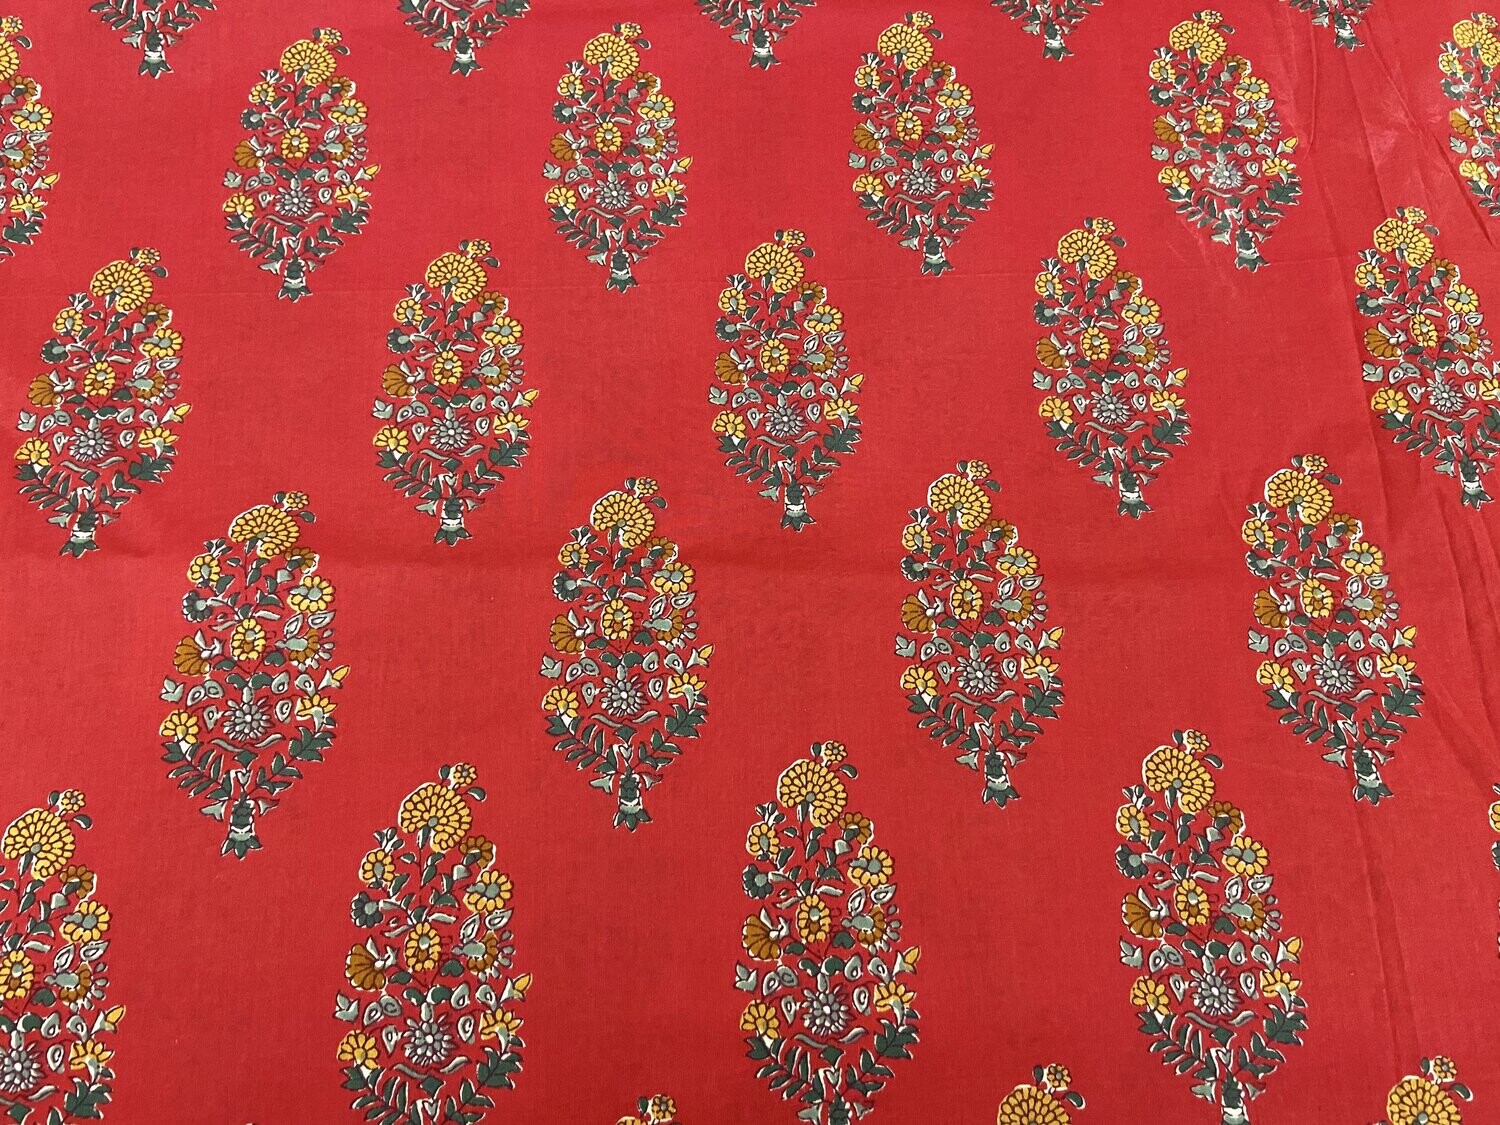 Red Floral Indian block print cotton fabric, Mughal print fabric, Paisley Cotton Fabric, 44 inch wide, sold by half yard